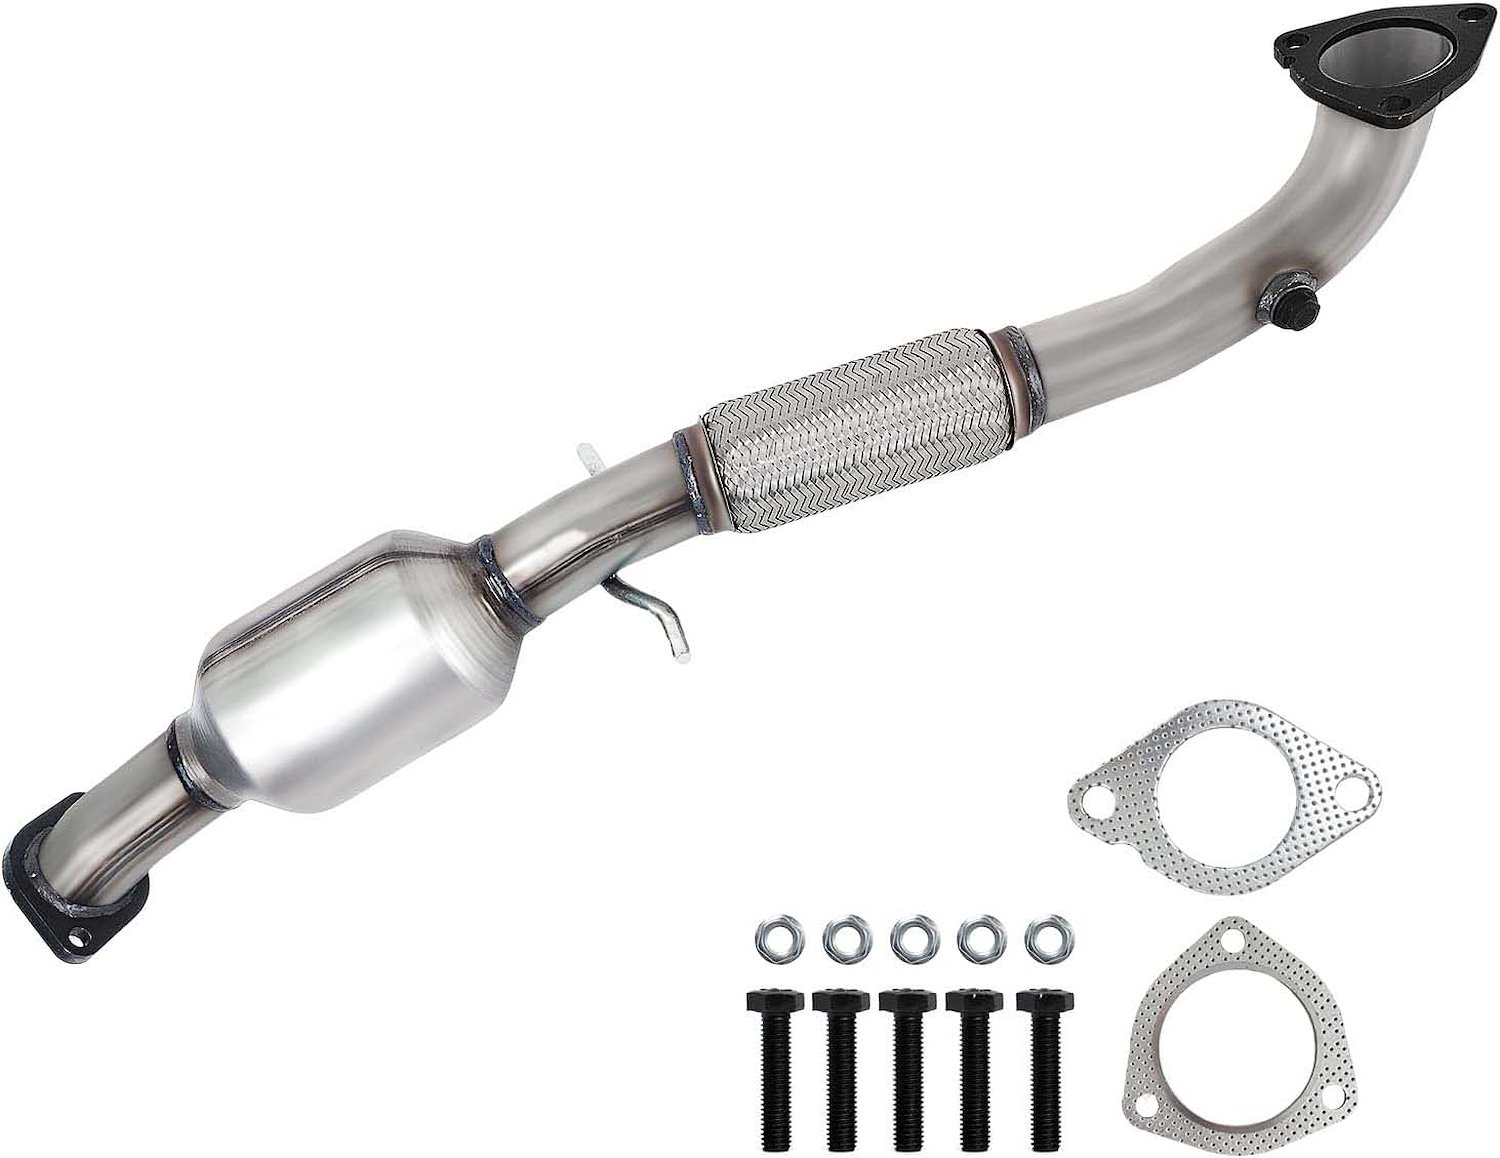 Catalytic Converter Fits 2012-2017 Buick Verano w/2.4L 4 cyl. Eng. [Rear]